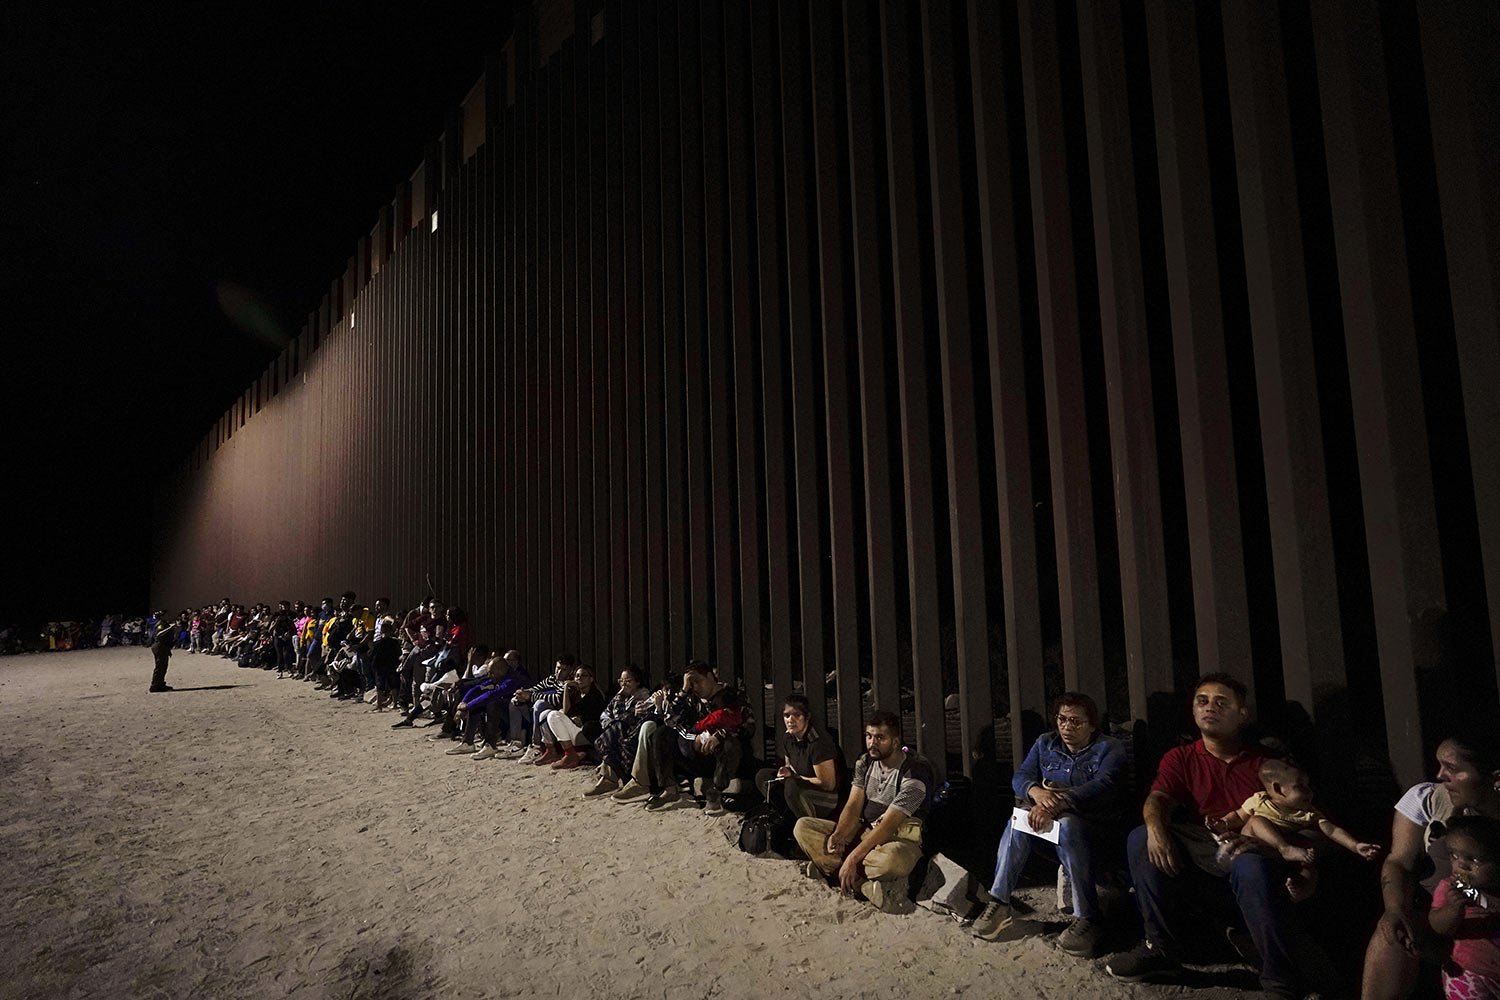  Migrants wait along a border wall after crossing from Mexico, near Yuma, Ariz., Tuesday, Aug. 23, 2022. (AP Photo/Gregory Bull) 